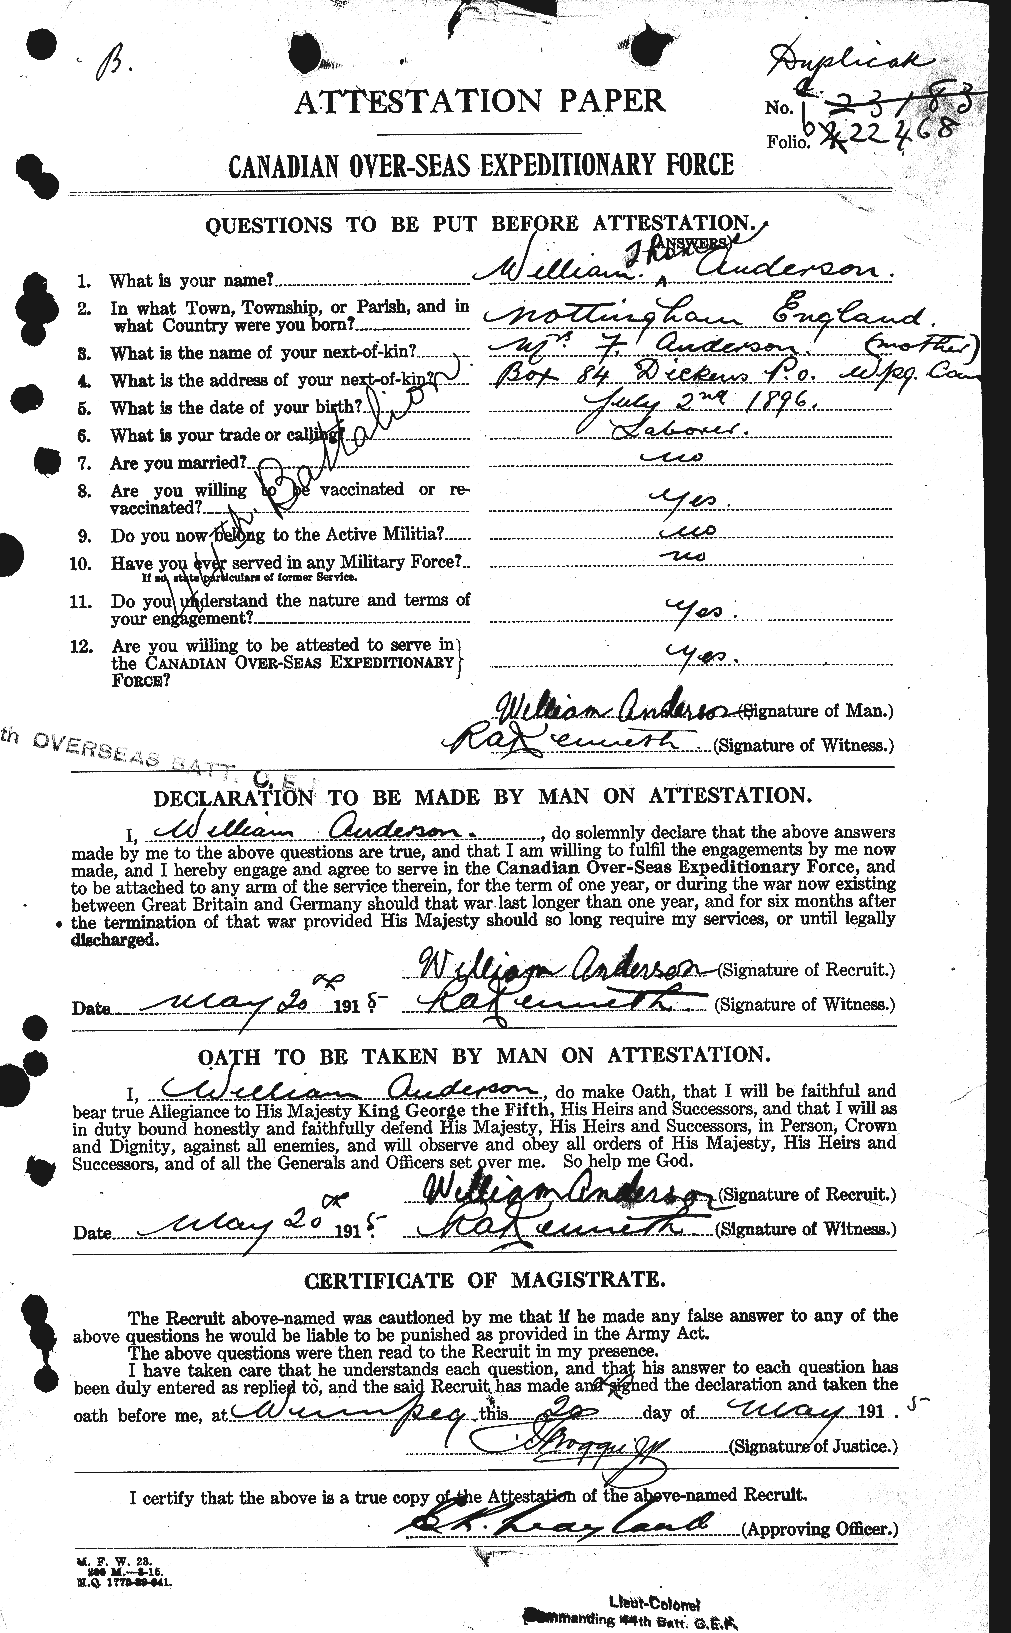 Personnel Records of the First World War - CEF 210673a